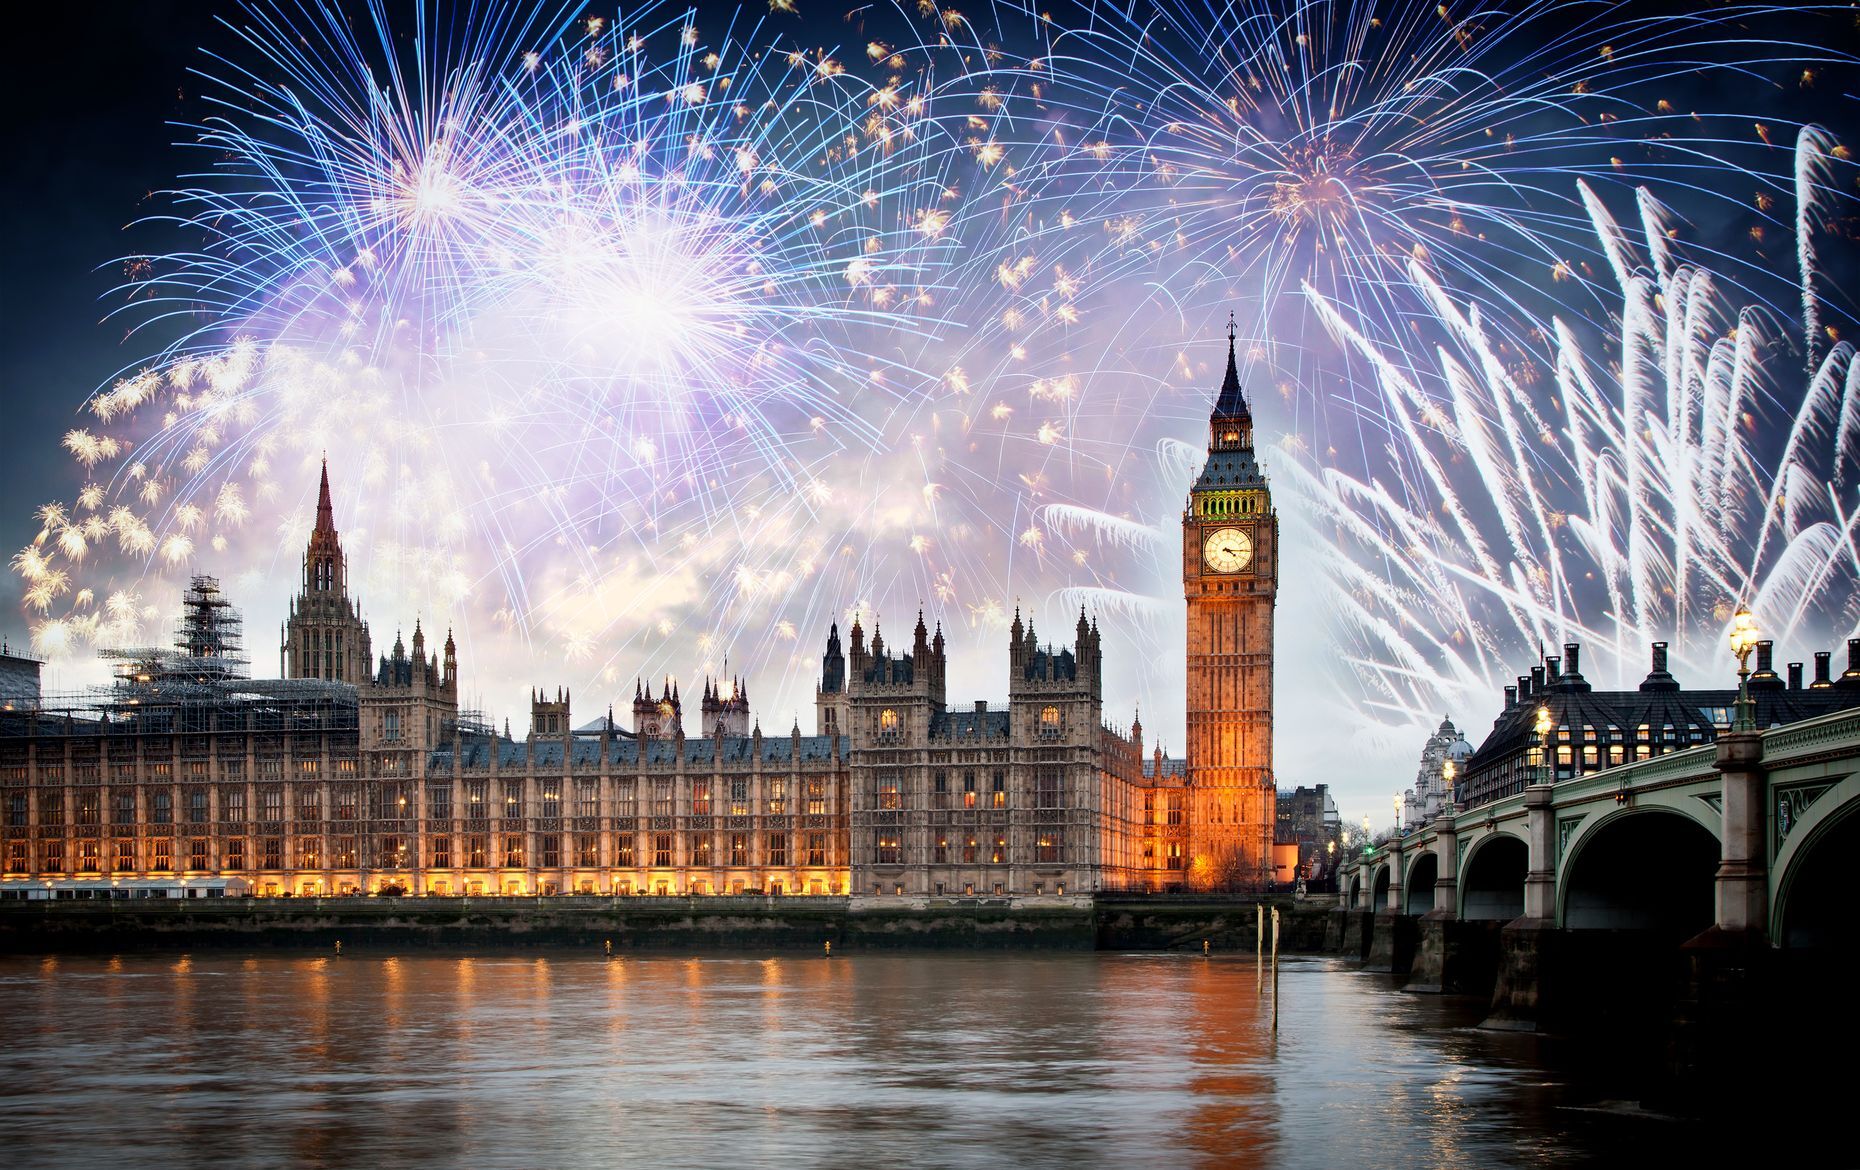 <p>This quintessential British activity features dazzling displays of fireworks, an effigy set ablaze and plenty of tasty treats to eat all night. <a href="https://www.cnn.com/travel/article/guy-fawkes-bonfire-night/index.html" title="https://www.cnn.com/travel/article/guy-fawkes-bonfire-night/index.html">Guy Fawkes Night</a> is celebrated on November 5 every year in the UK to mark an event that happened more than 400 years ago which could have altered the course of British history. And while many outside Britain might not know much about the night, they may recognize the mask which over the years has become a global <a href="https://theweek.com/articles/463151/brief-history-guy-fawkes-mask" title="https://theweek.com/articles/463151/brief-history-guy-fawkes-mask">symbol of dissent.</a> </p>